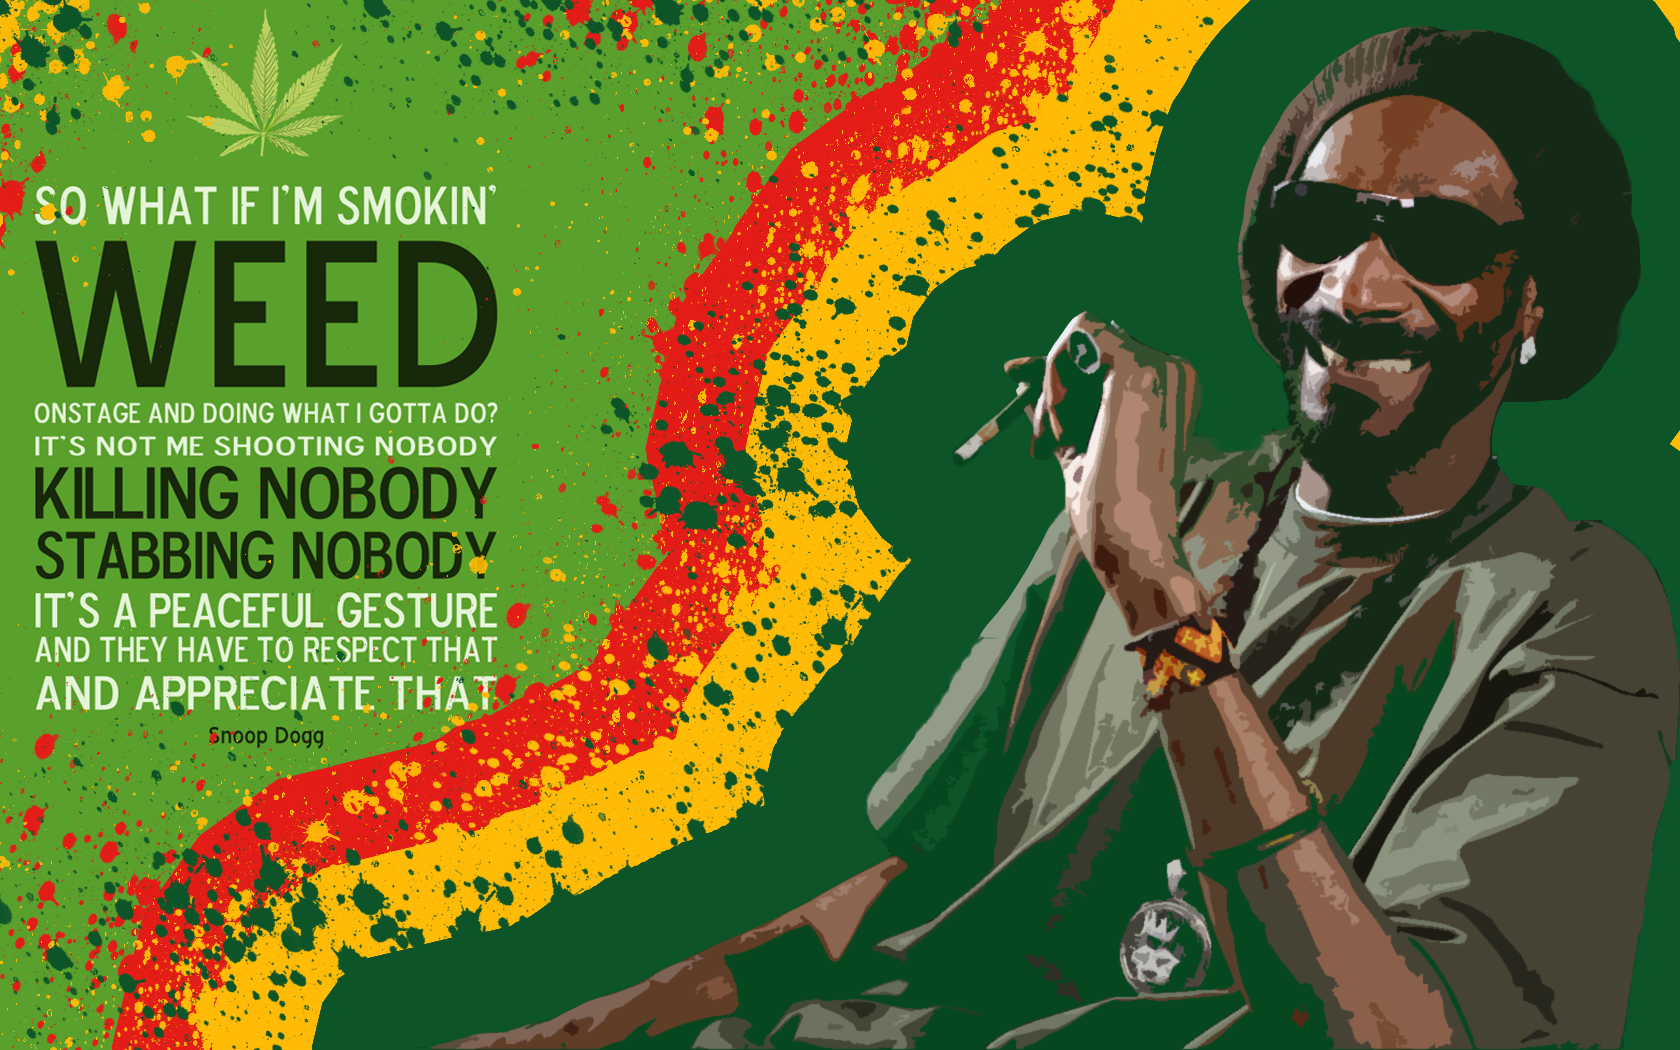 People 1680x1050 Snoop Dogg cannabis sunglasses green joint smiling quote peace musician relaxing men drugs